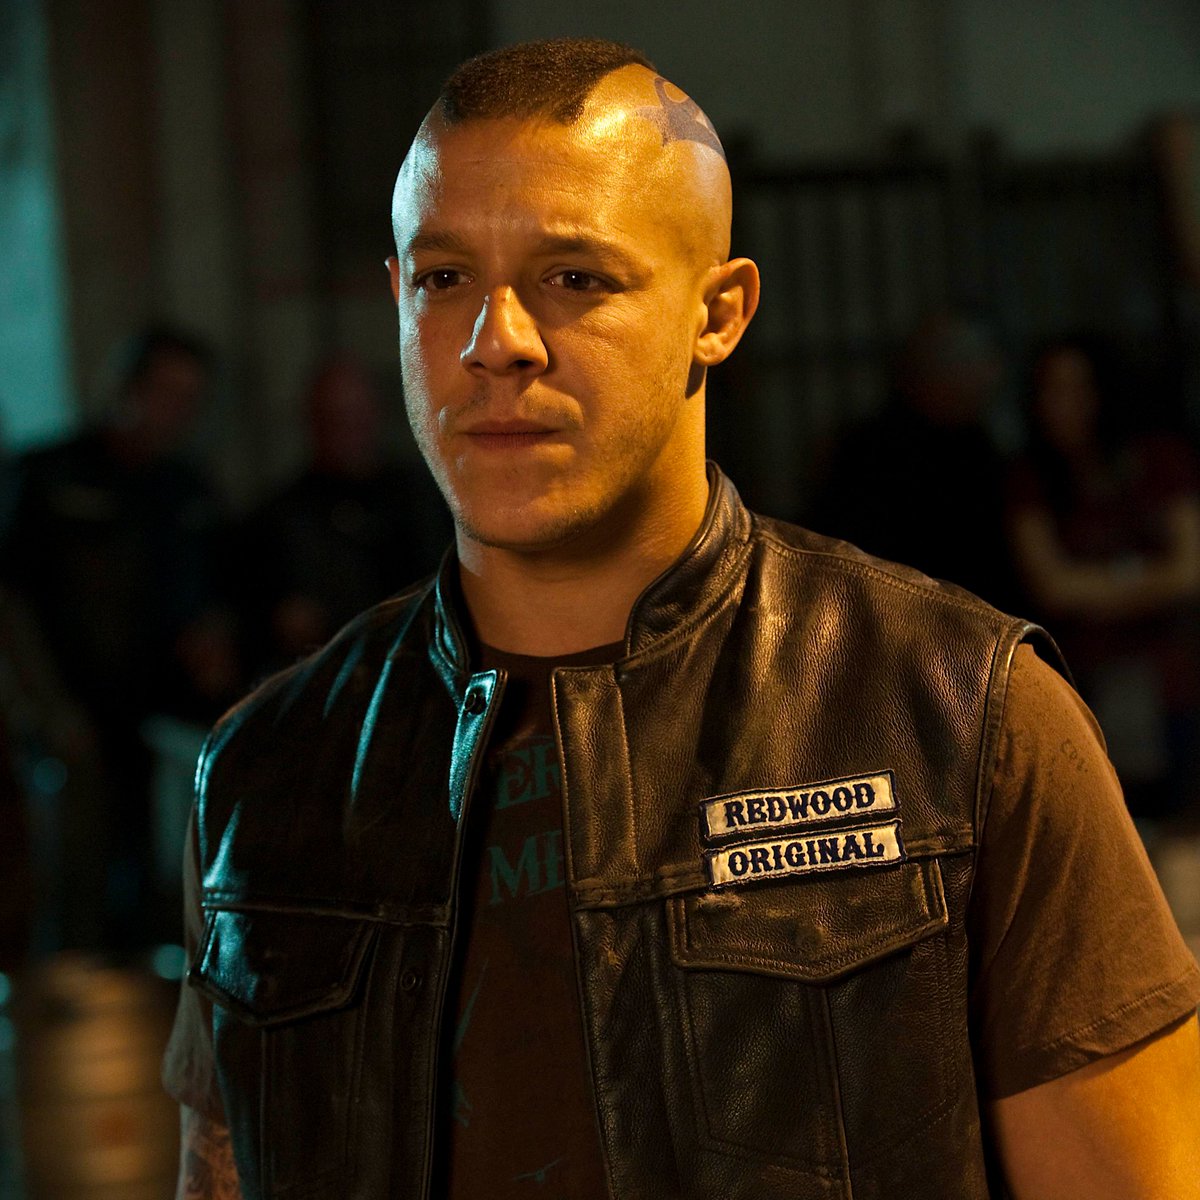 Join us in wishing Theo Rossi a happy birthday!